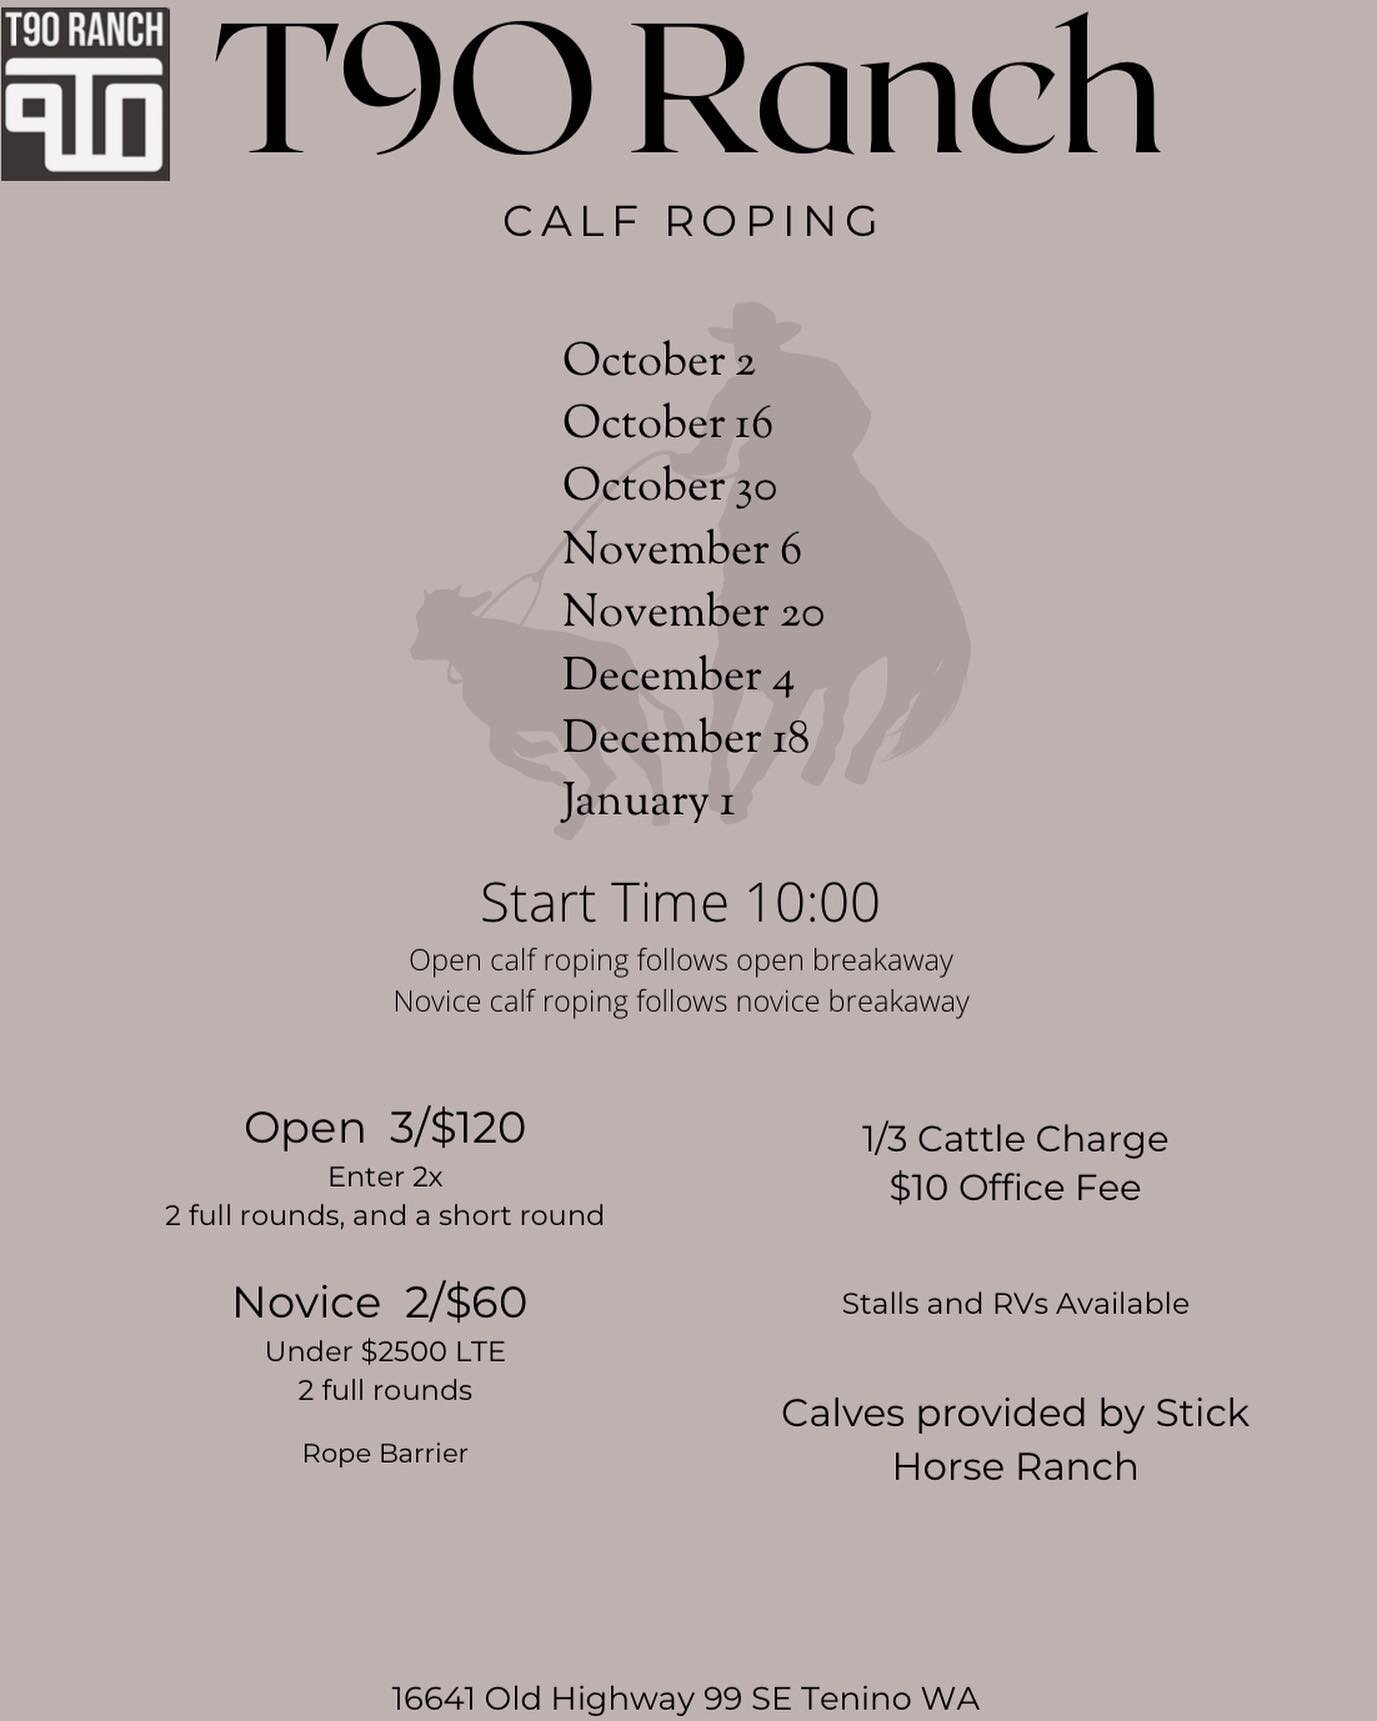 We have added Tie Down roping to our series that starts Oct. 1st.
- tiedown open follows the Breakaway open.
-Novice tiedown follows Breakaway Novice.
More opportunities.
More added money!